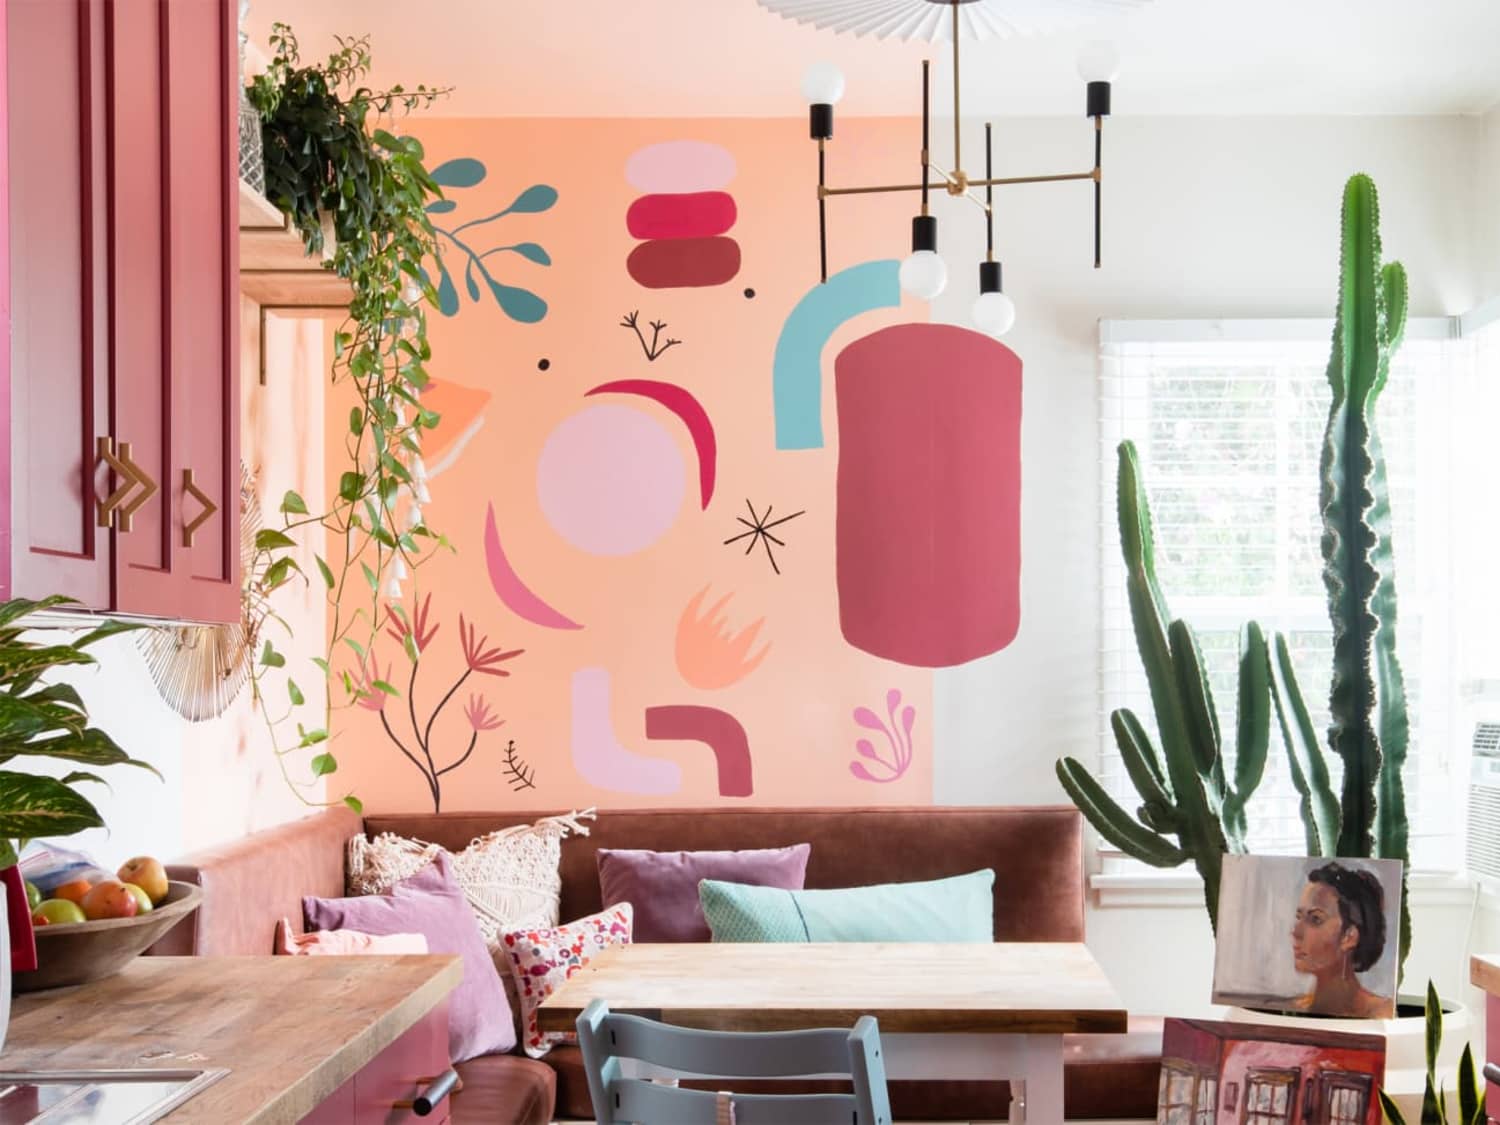 House & Home - Painting Walls Pink? Make Sure You Do This One Thing!